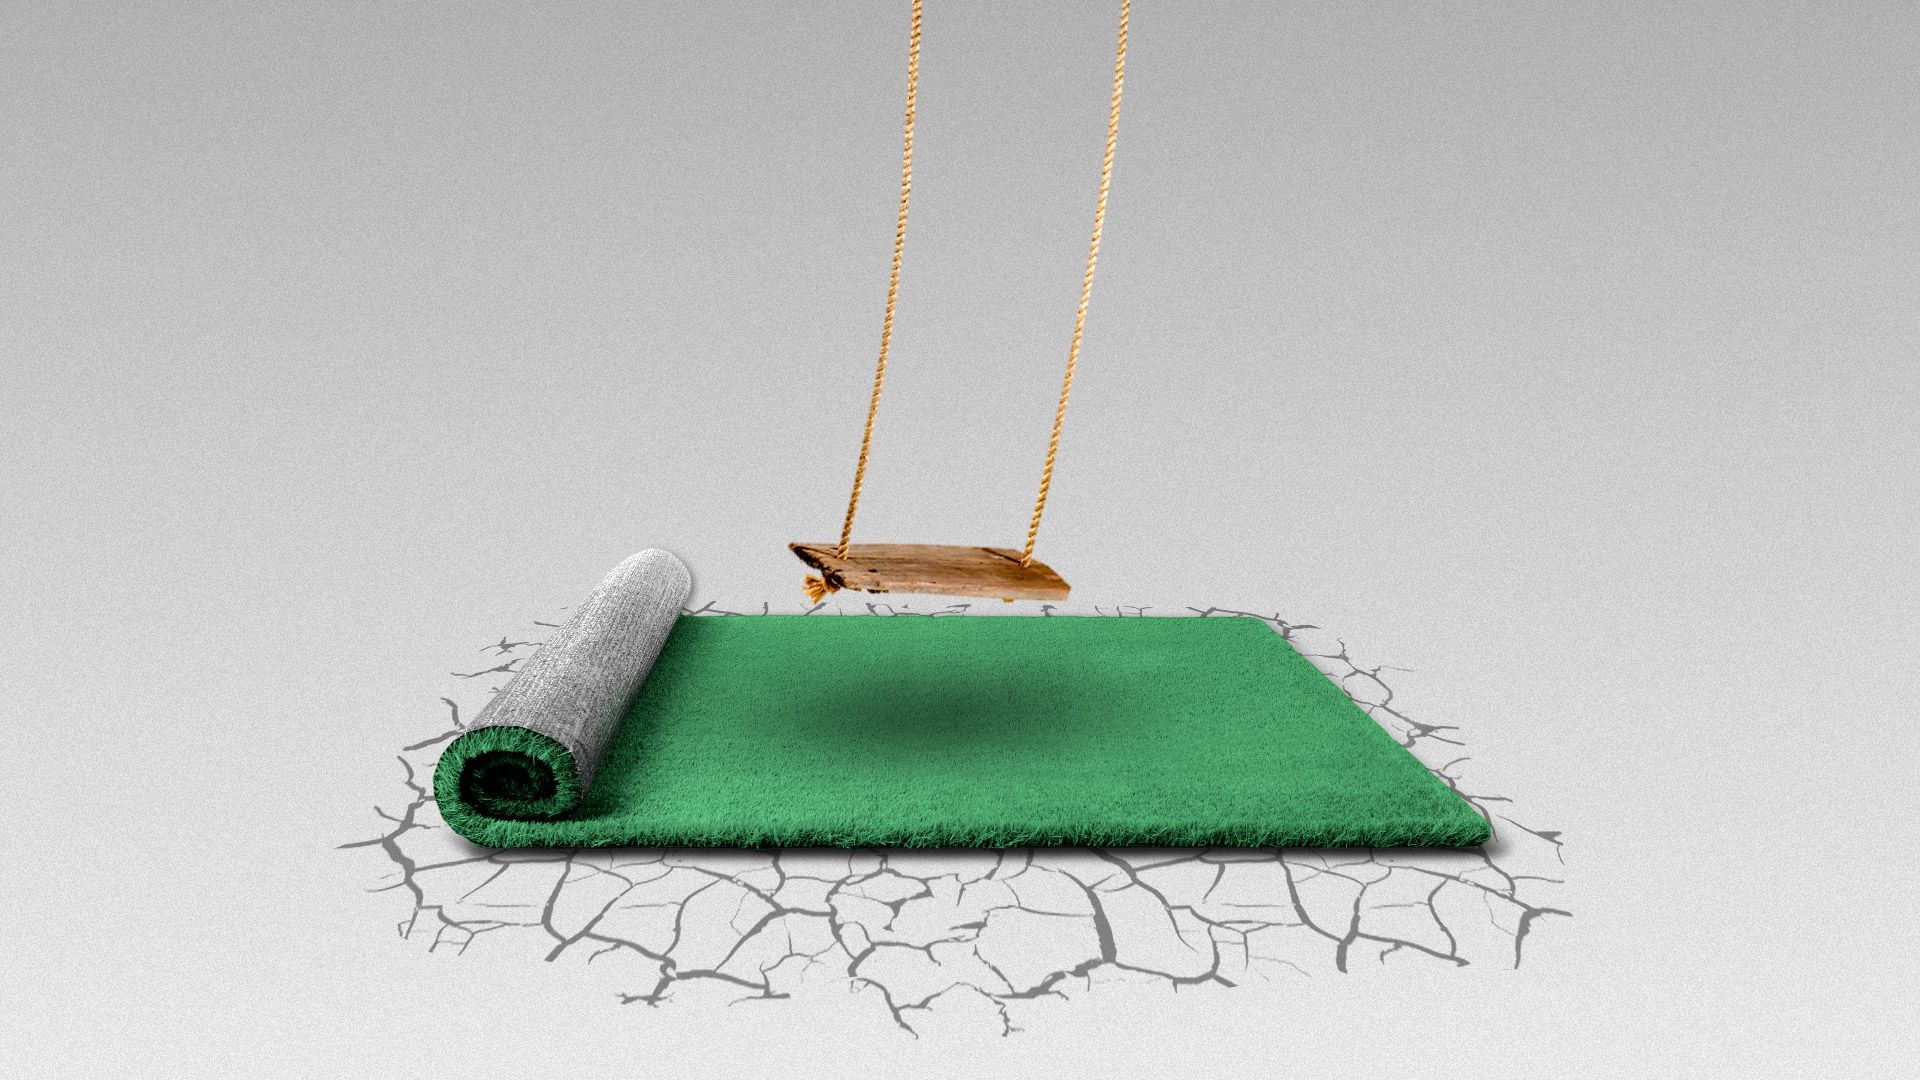 Illustration of a patch of grass on a parched piece of land with a swing above.